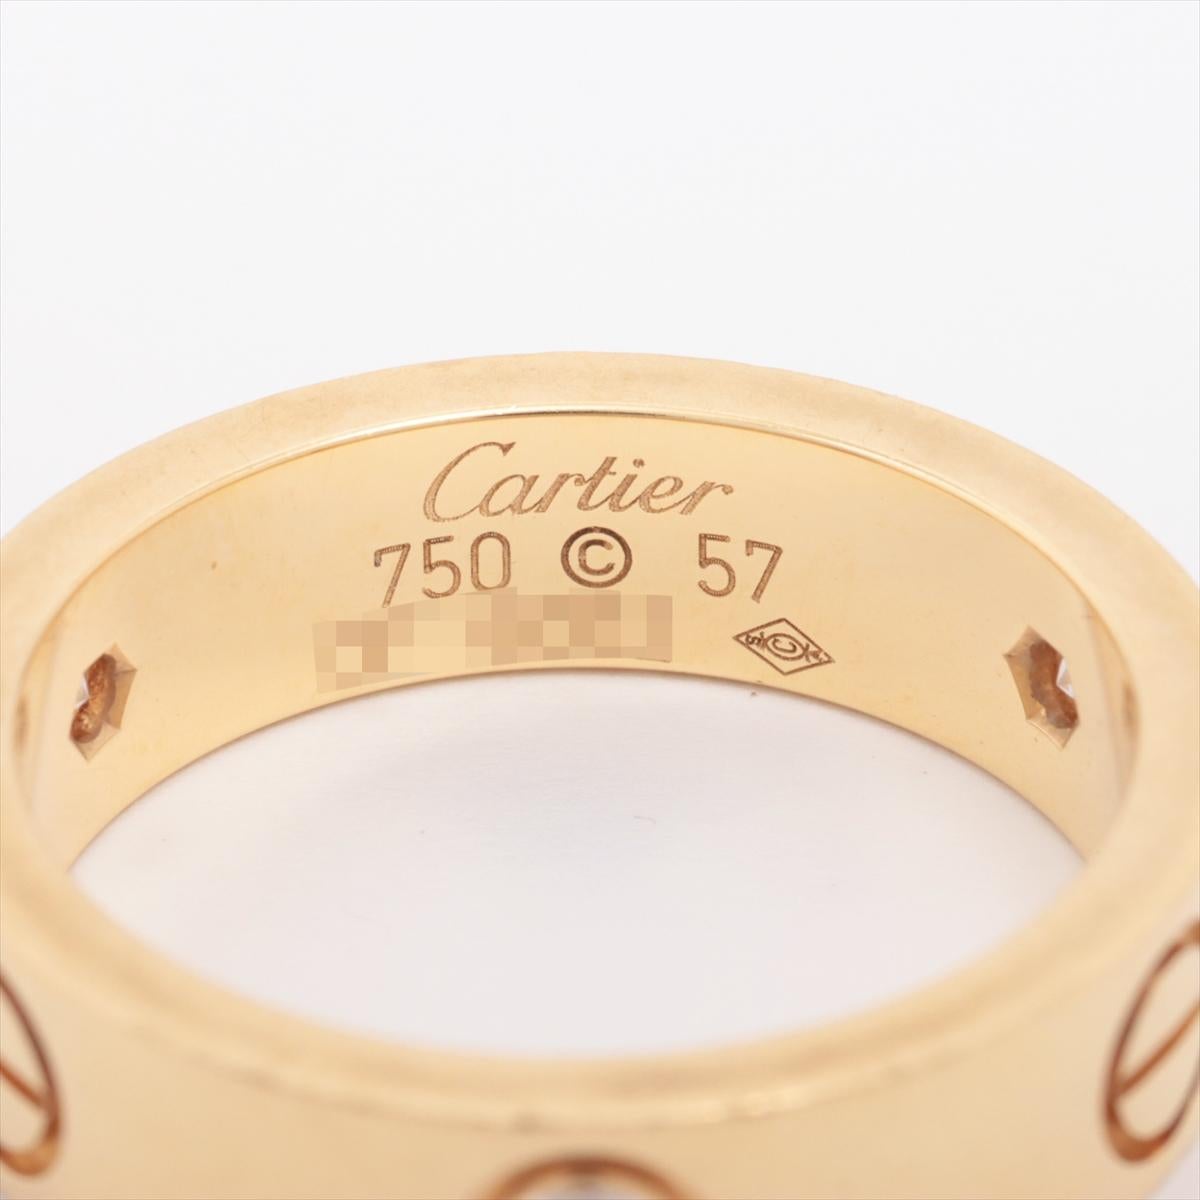 Cartier Love half diamond ring In Good Condition For Sale In Oyster Bay, NY